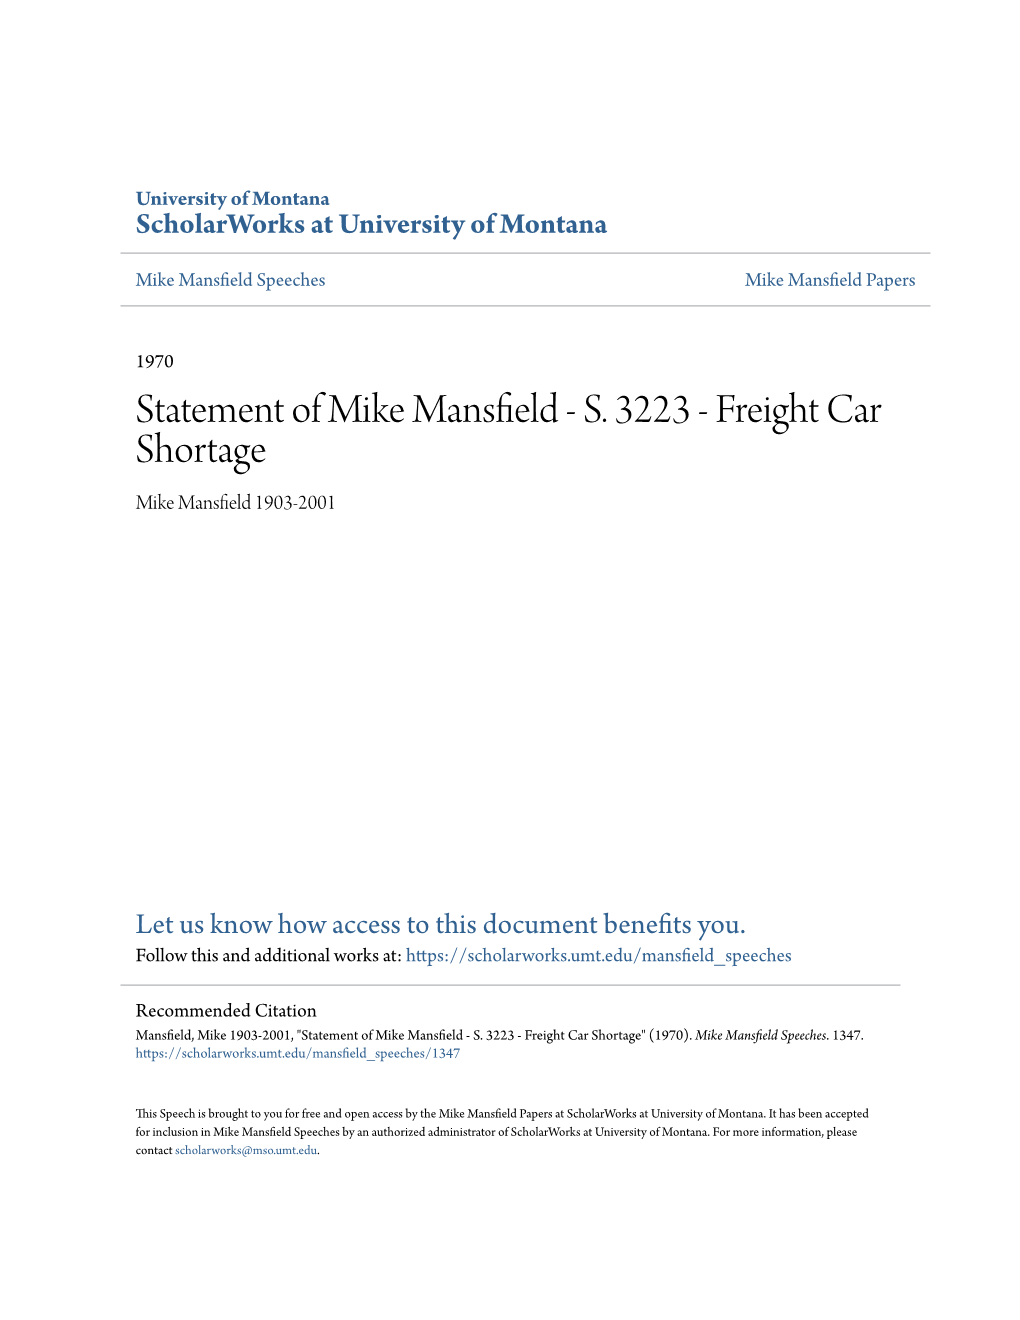 Statement of Mike Mansfield - .S 3223 - Freight Car Shortage Mike Mansfield 1903-2001